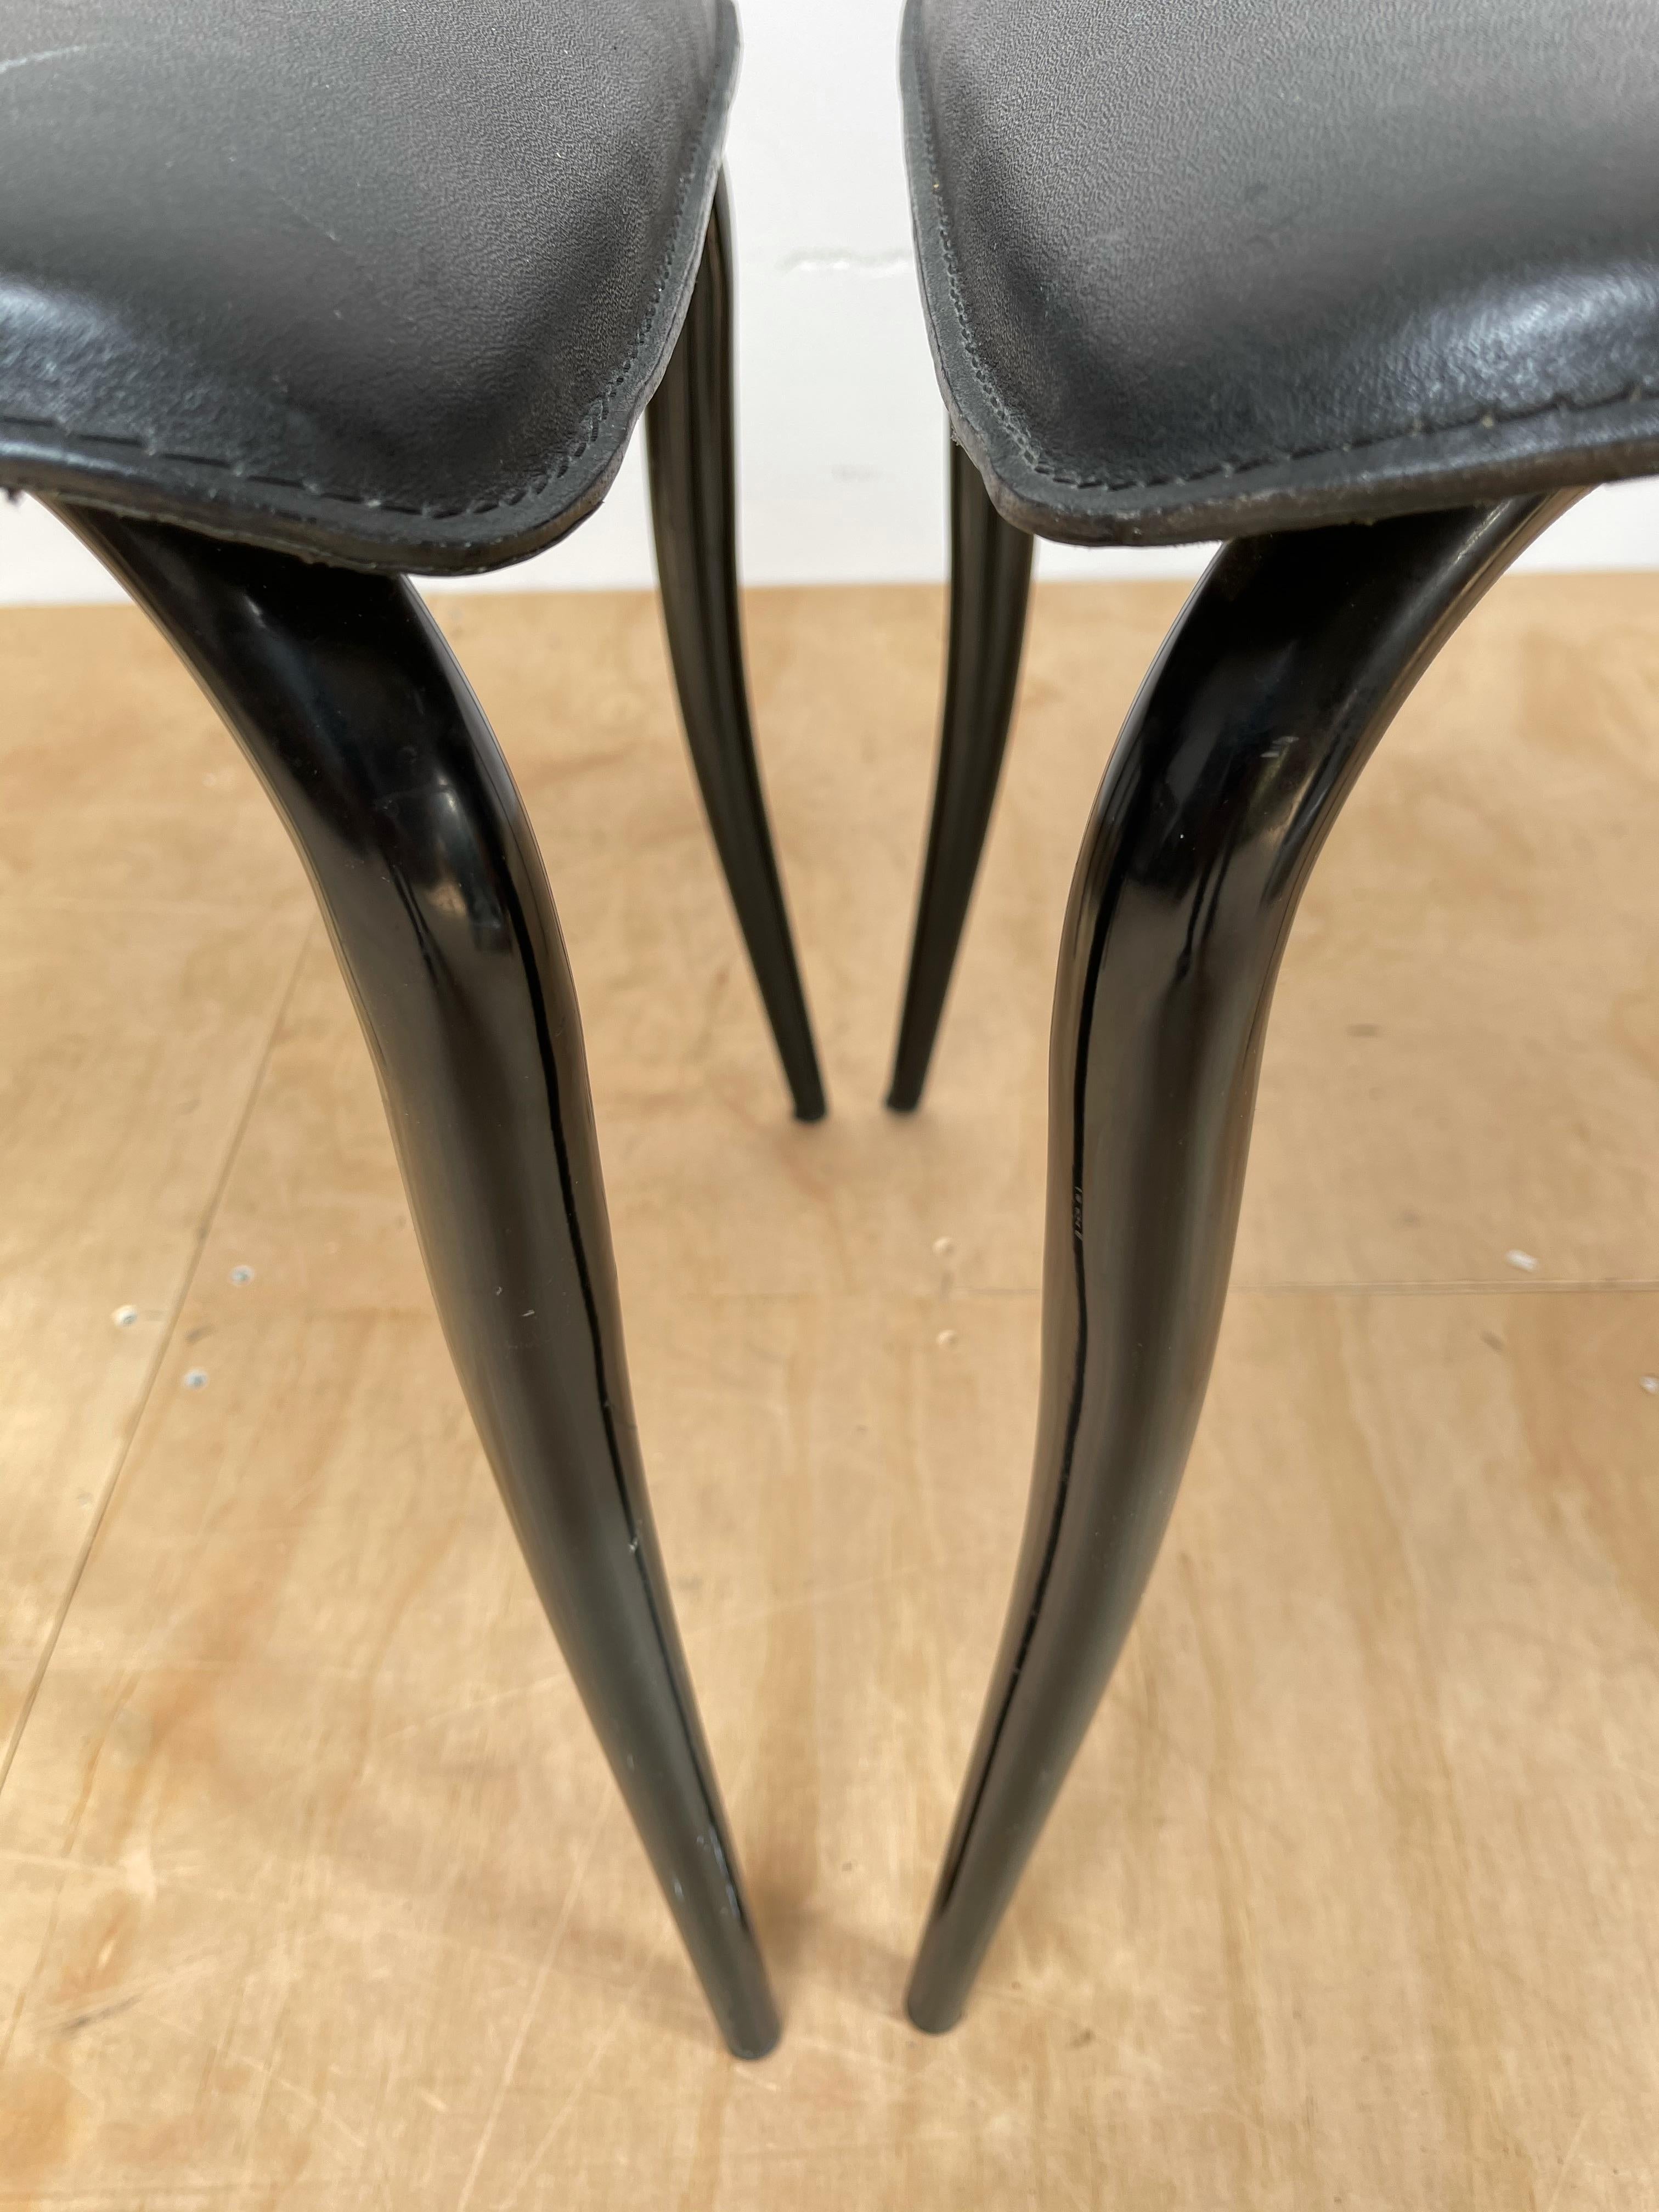 Italian Design Mid-Century Modern Set of 4 Dining Chairs w. Black Leather Seats For Sale 2